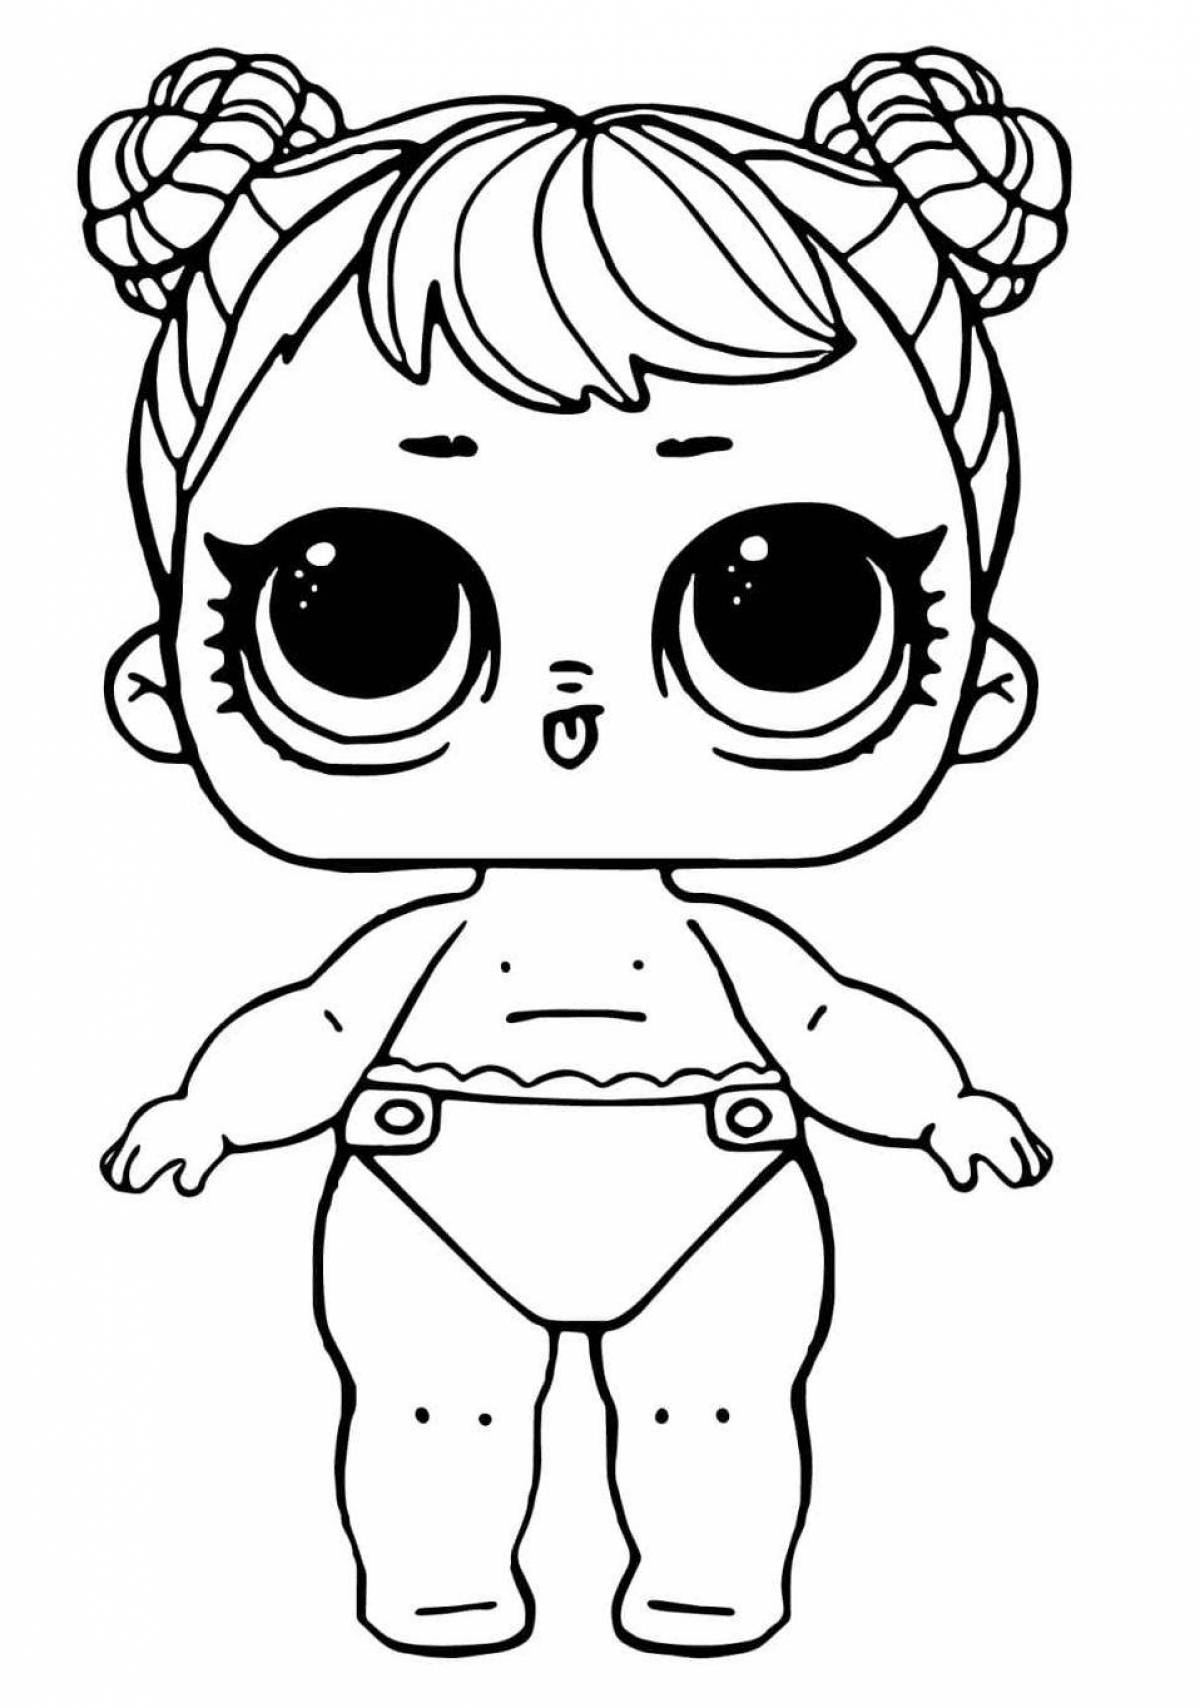 Weird coloring pages for lol dolls